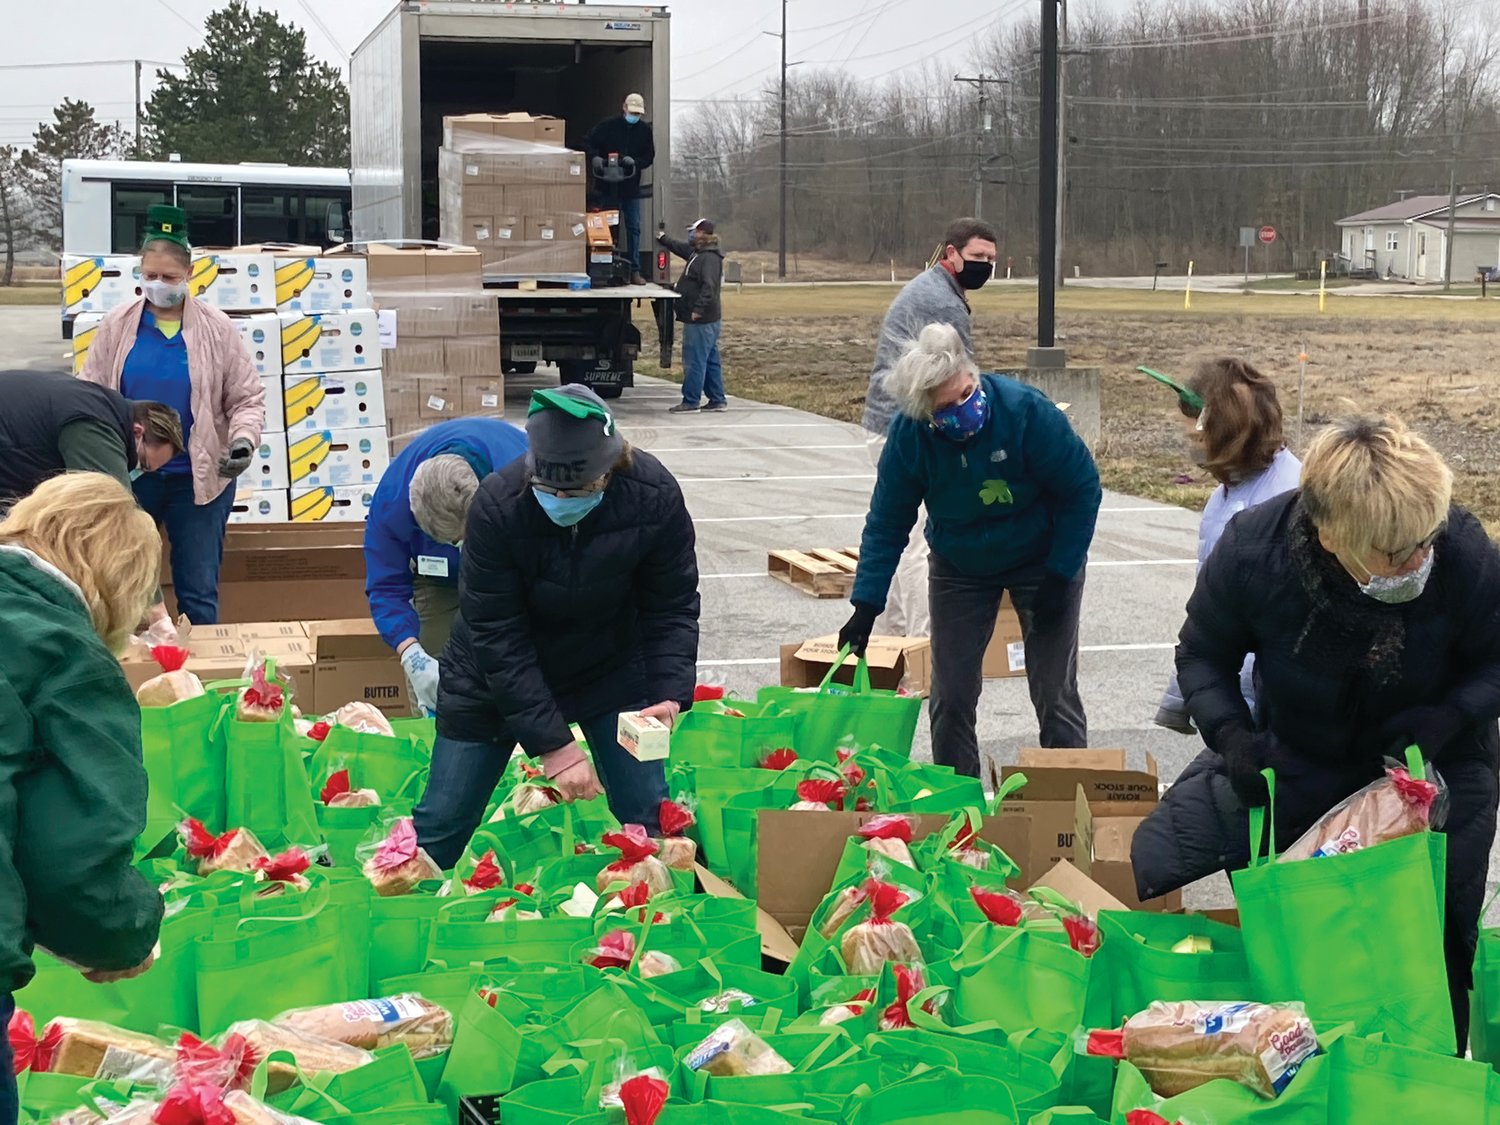 Montgomery County Youth Service Bureau employees pack food before a Food Finders Food Bank Mobile Food Pantry distribution at the Boys & Girls Club of Montgomery County on Wednesday.